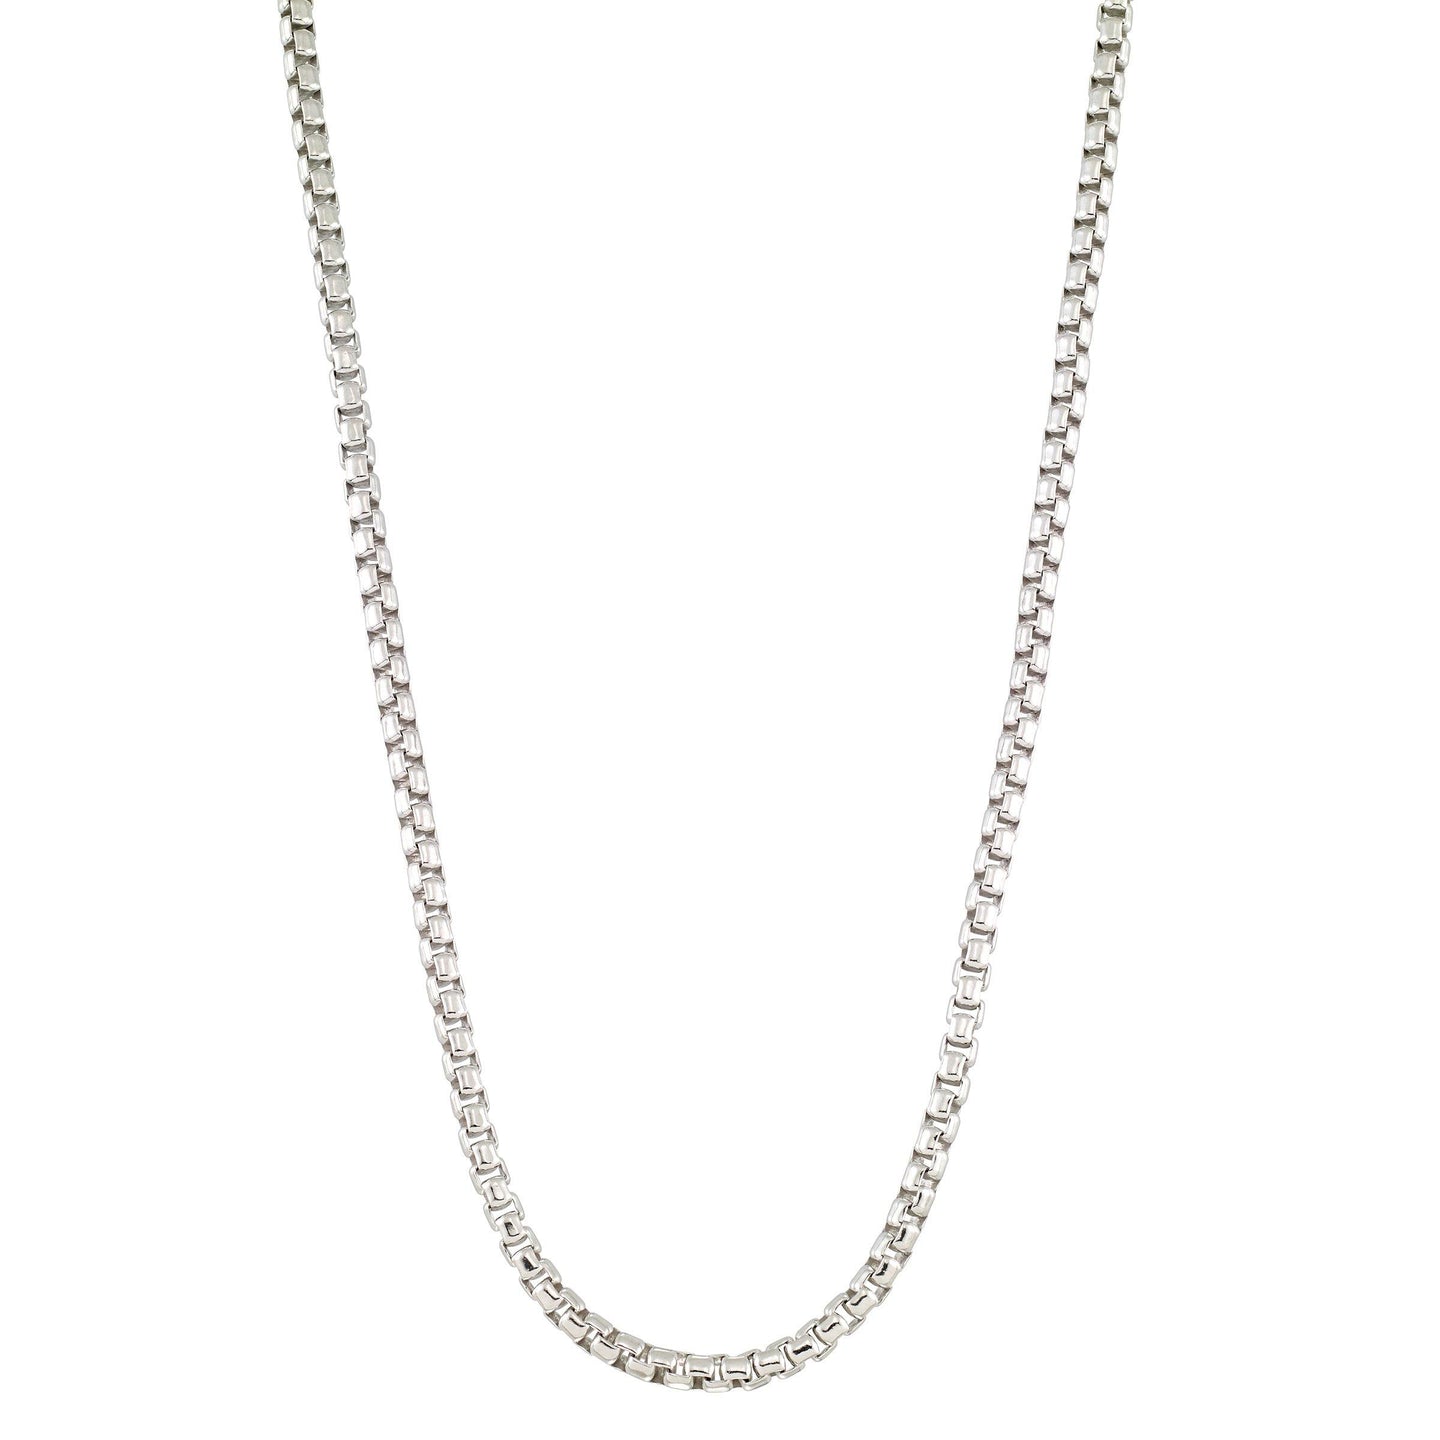 Box Chain Necklace - InclusiveJewelry